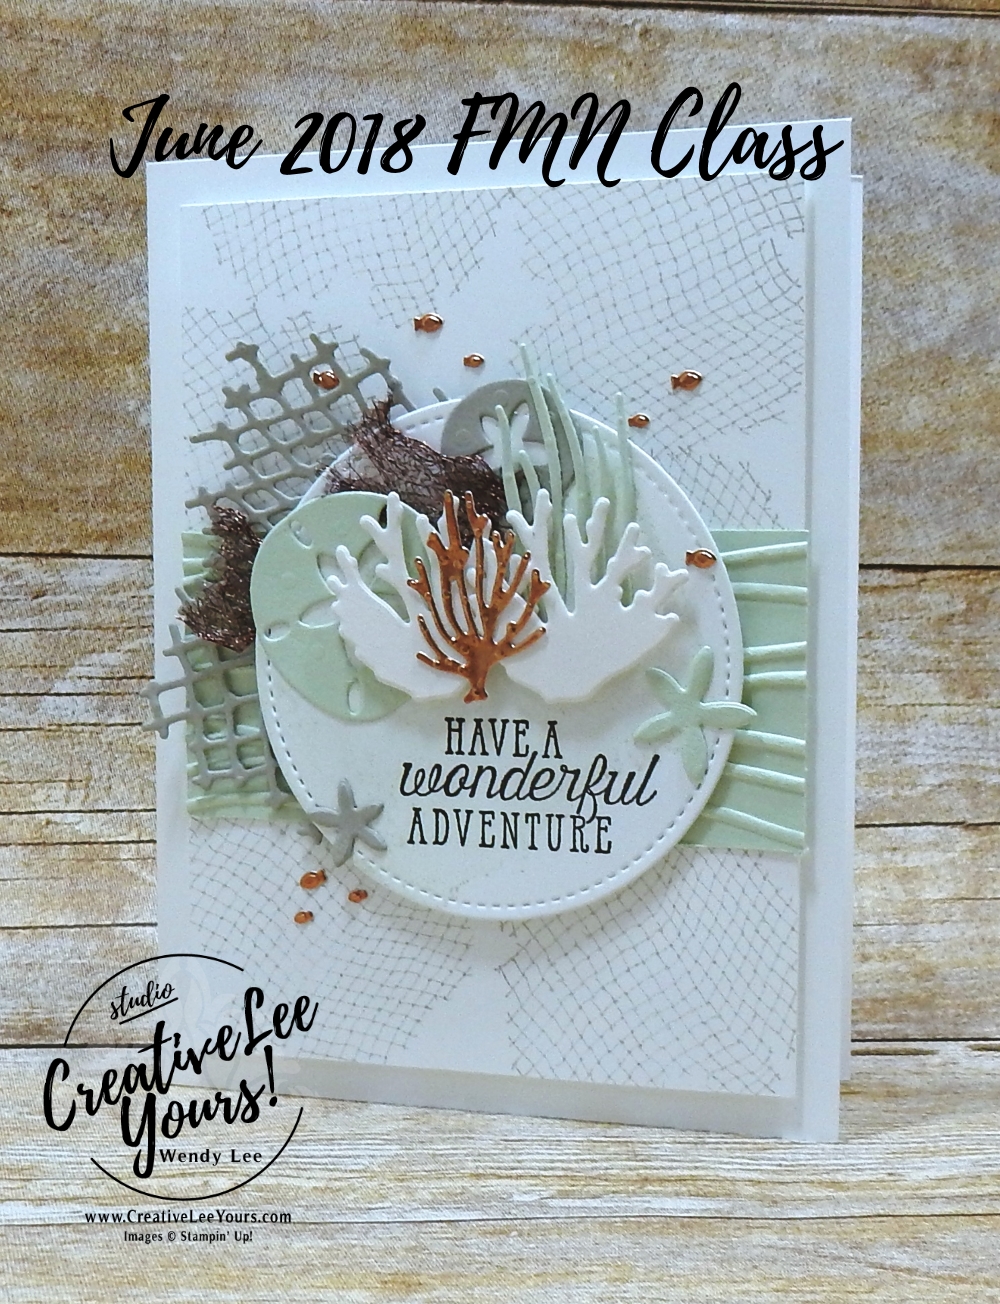 Wonderful Adventure by Wendy Lee, Stampin Up, stamping, handmade card, friend, thank you, birthday, #creativeleeyours, creatively yours, creative-lee yours, June 2018 FMN card class, forget me not, sea of textures stamp set, collage technique, SU, SU cards, rubber stamps